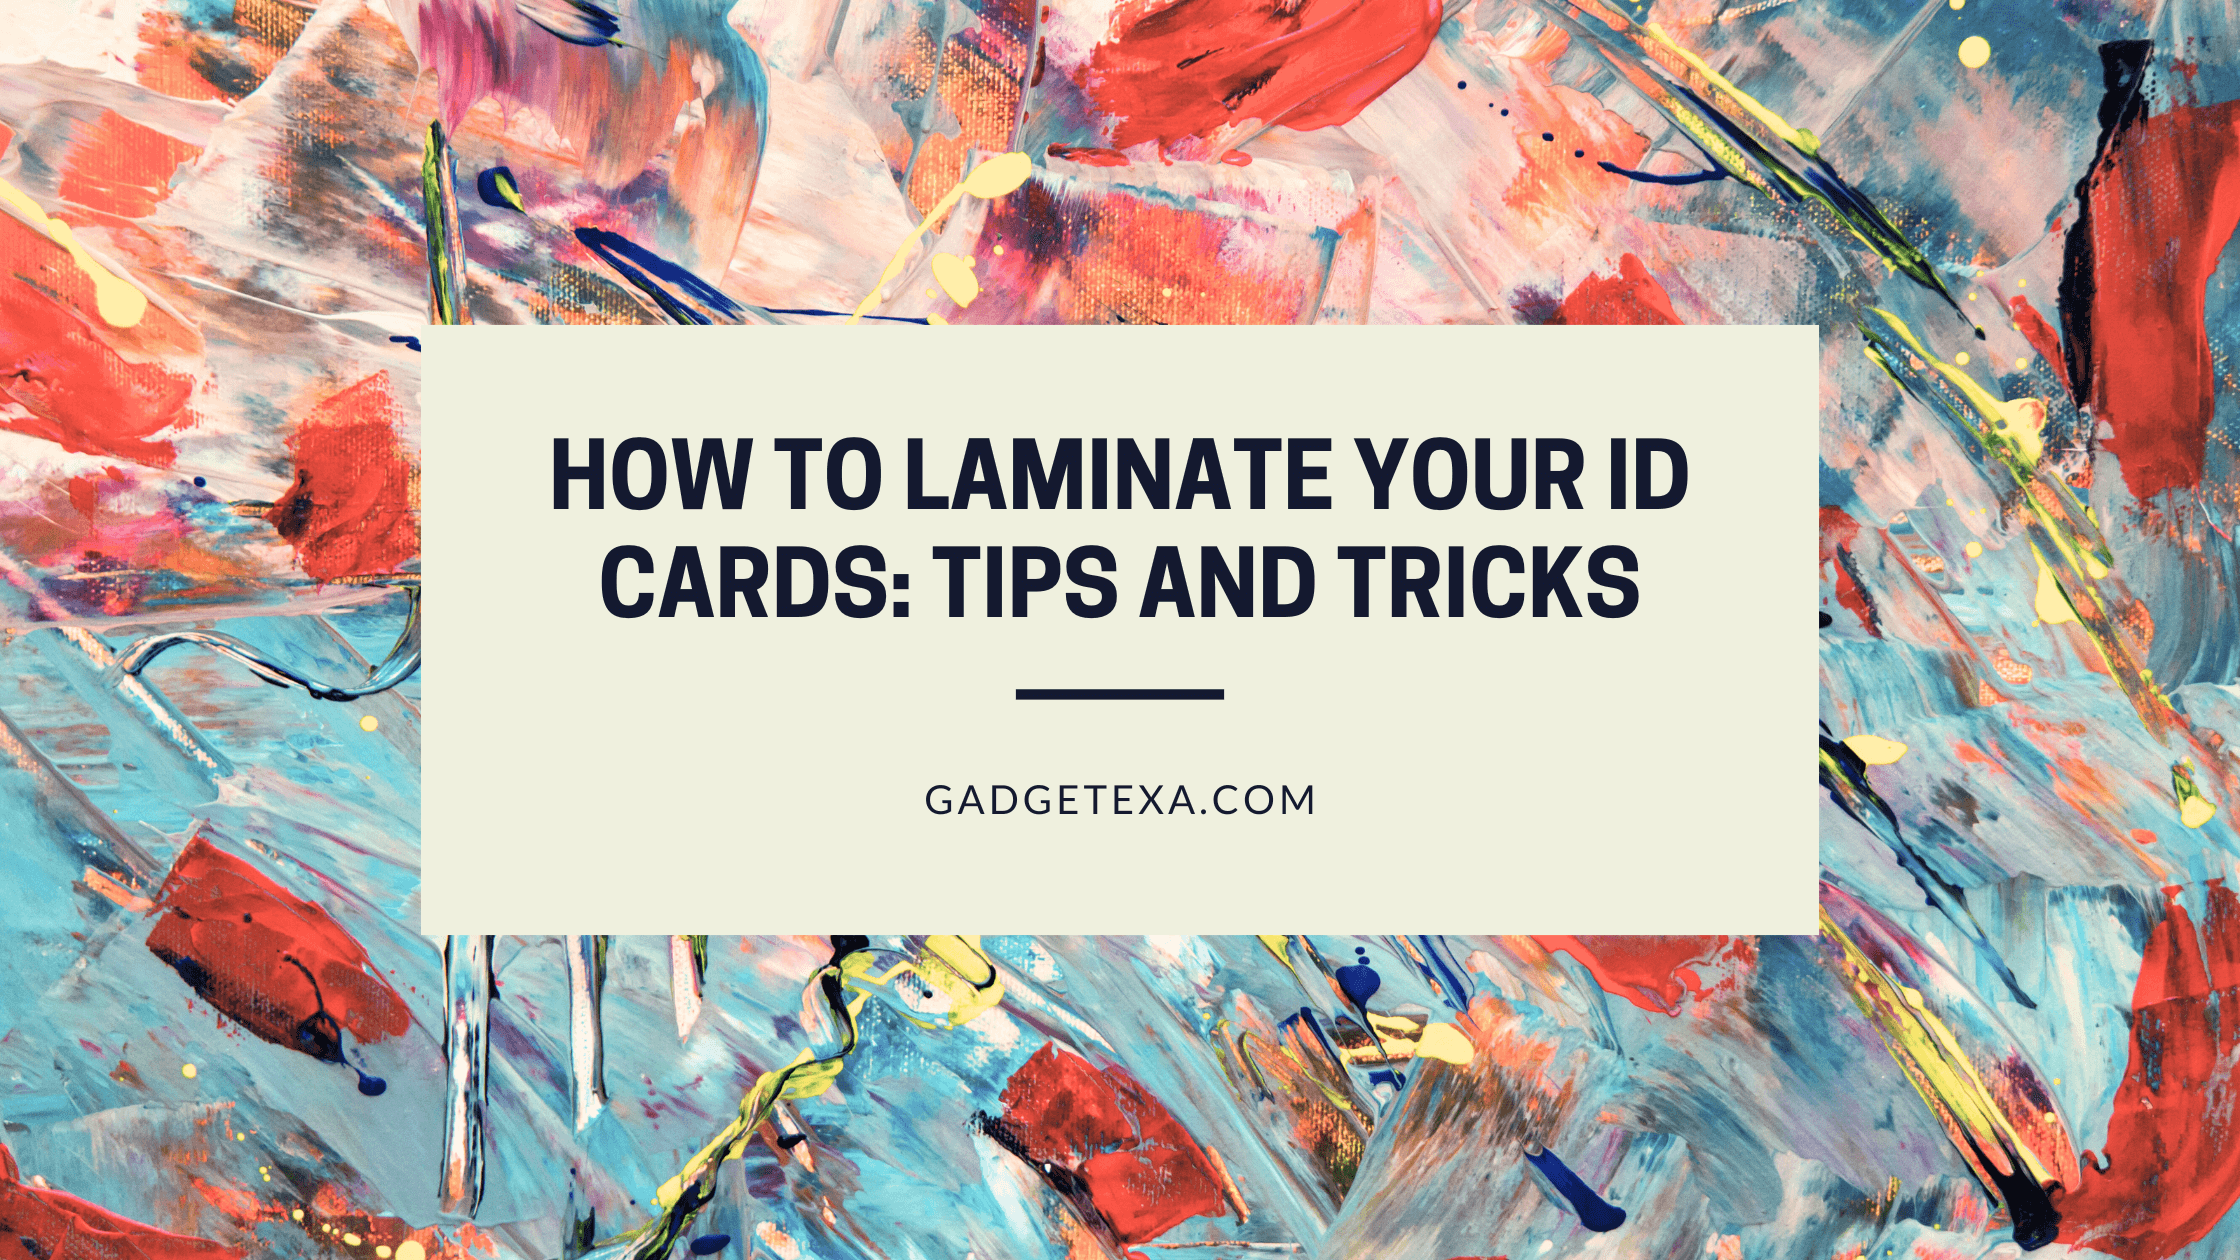 How to Laminate Your ID Cards Tips and Tricks (1)